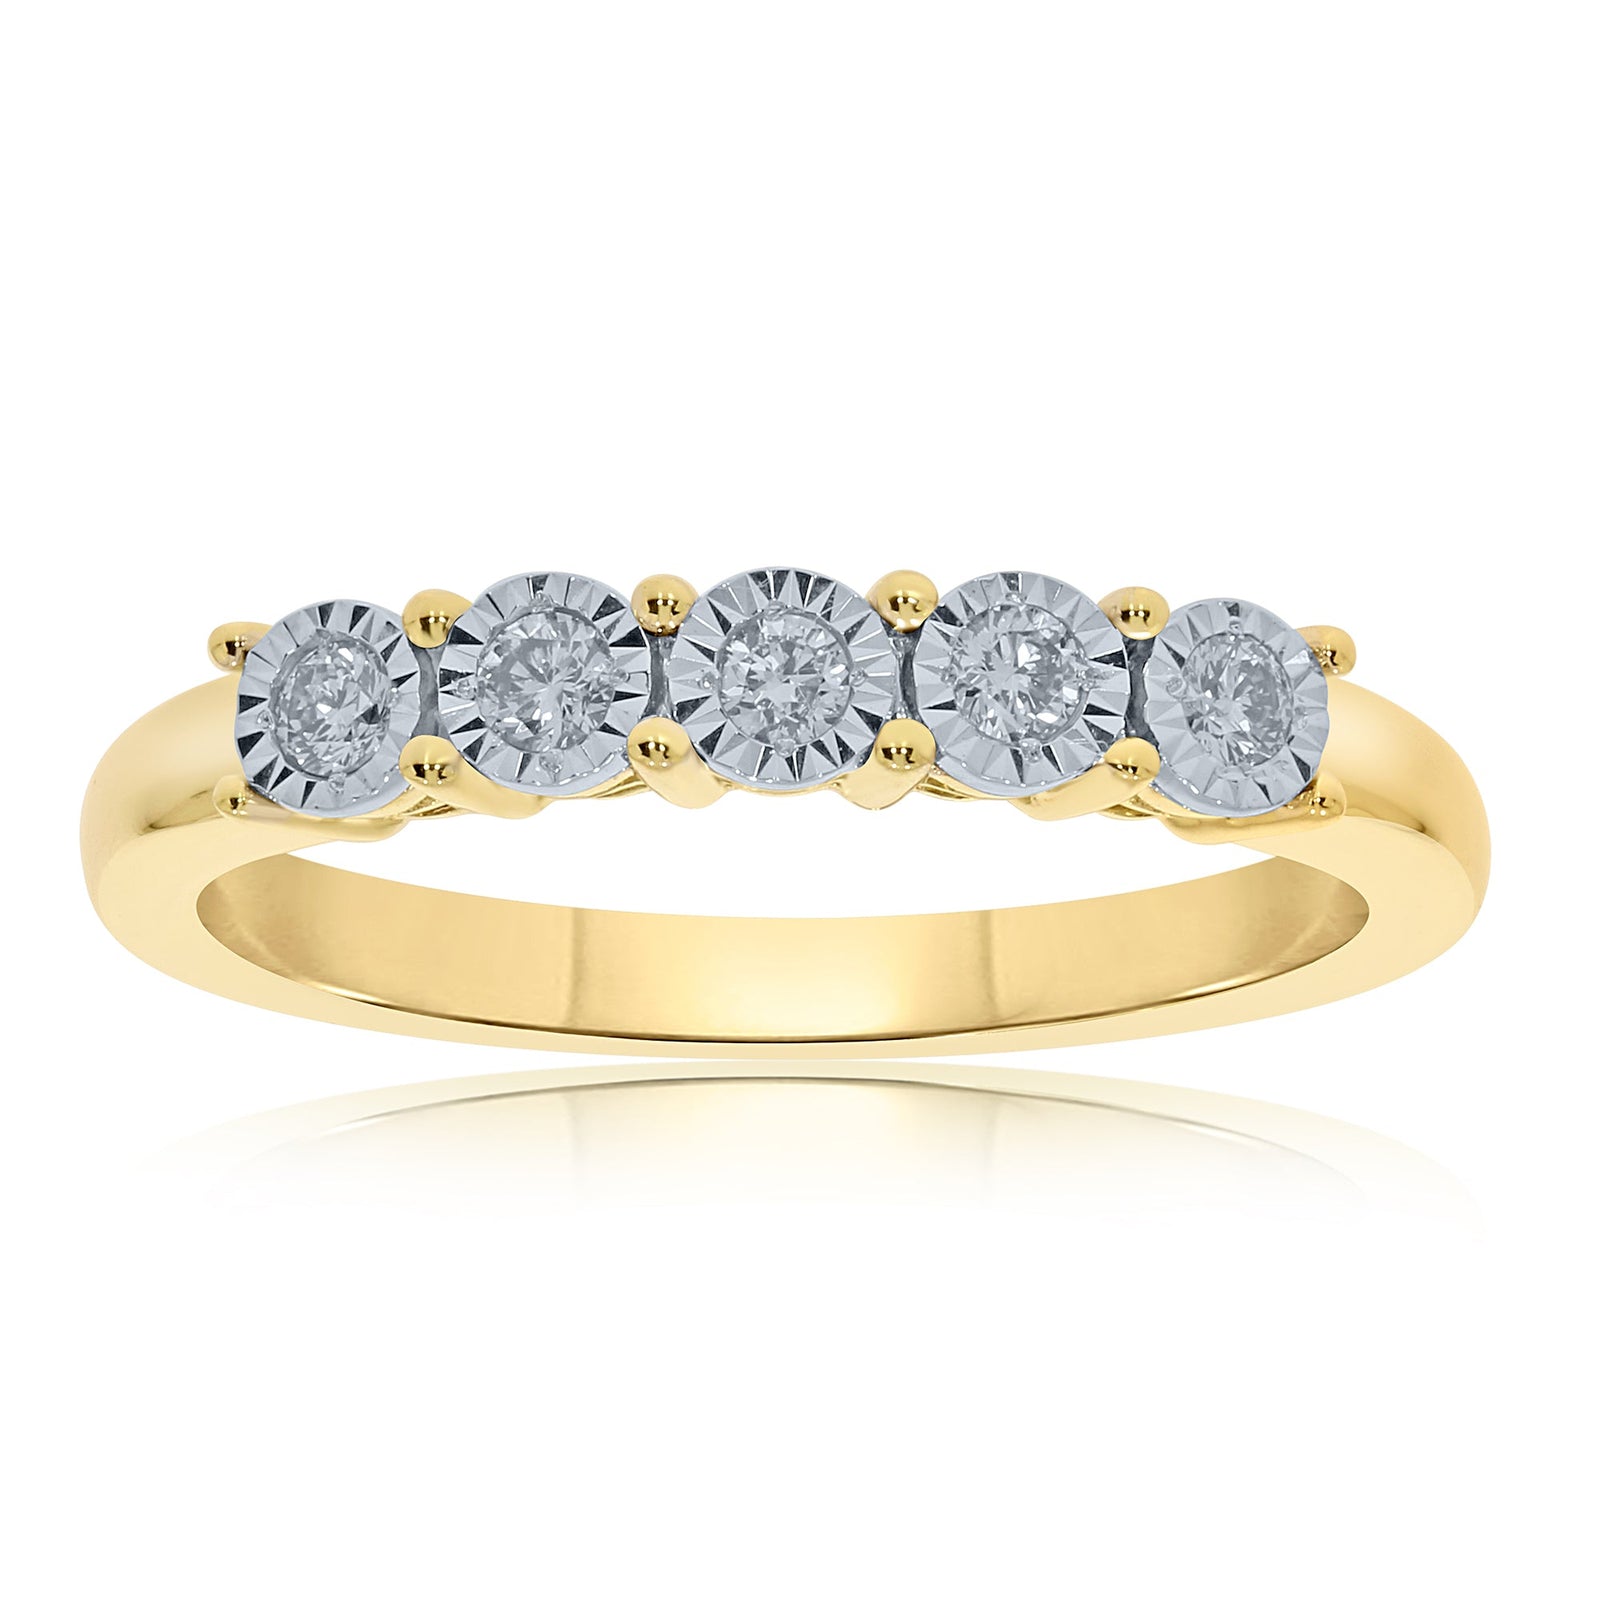 9ct gold 5 stone miracle plate diamond ring 0.15ct